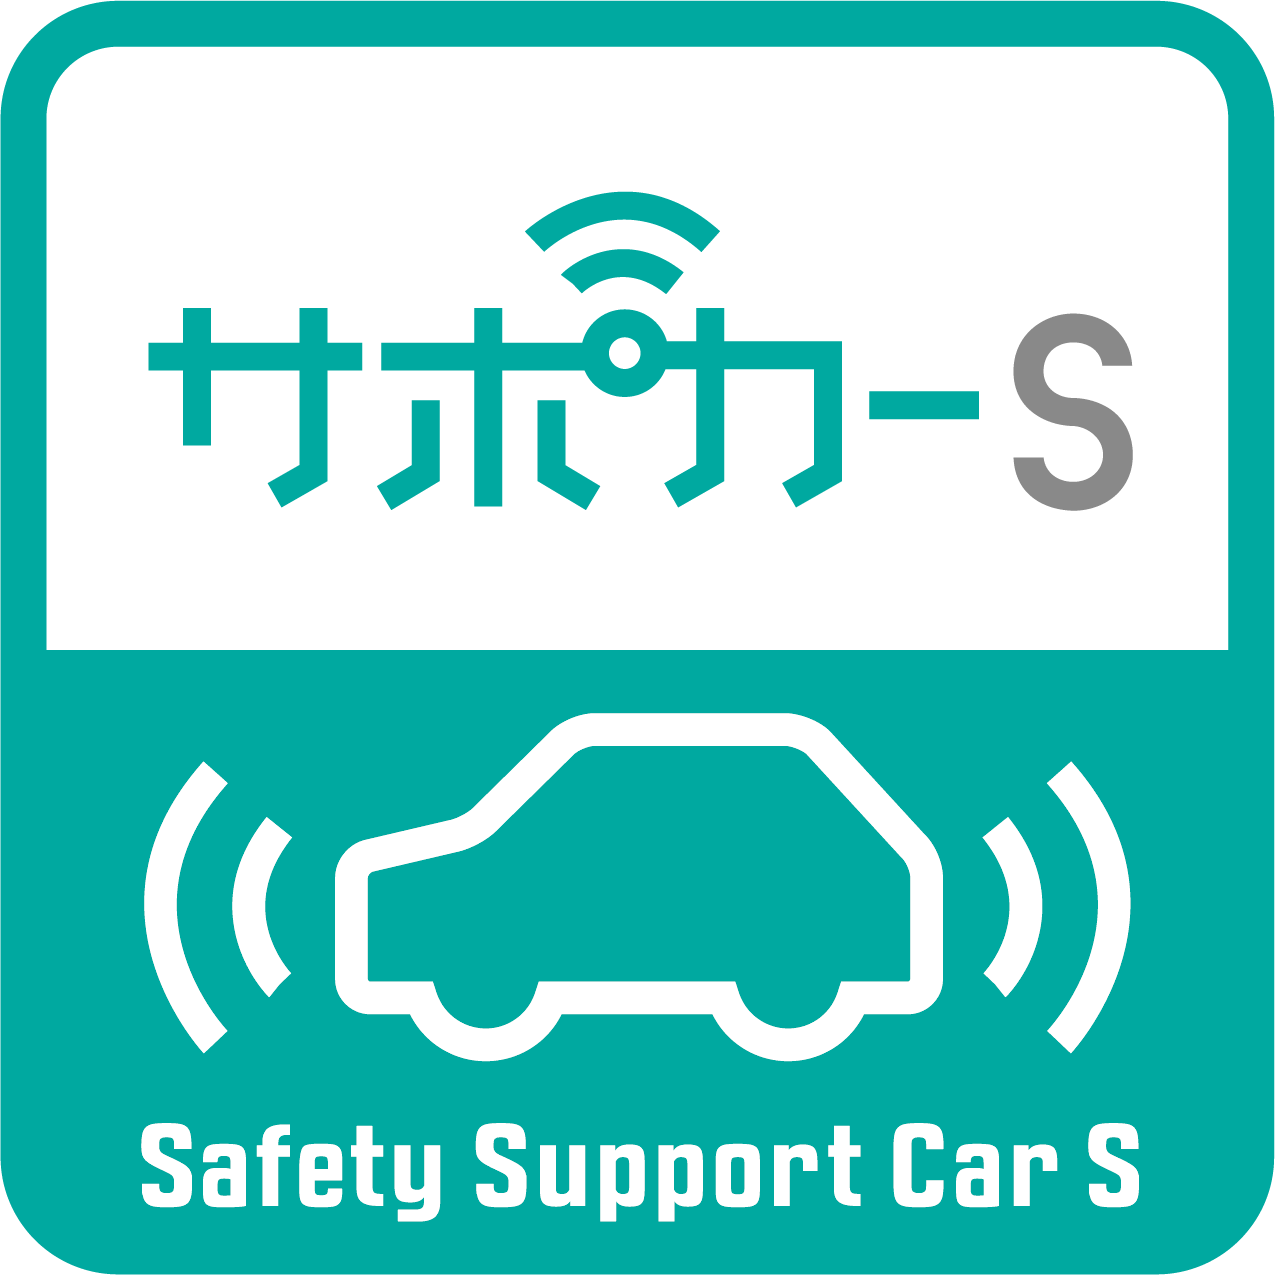 Safety Support Car series